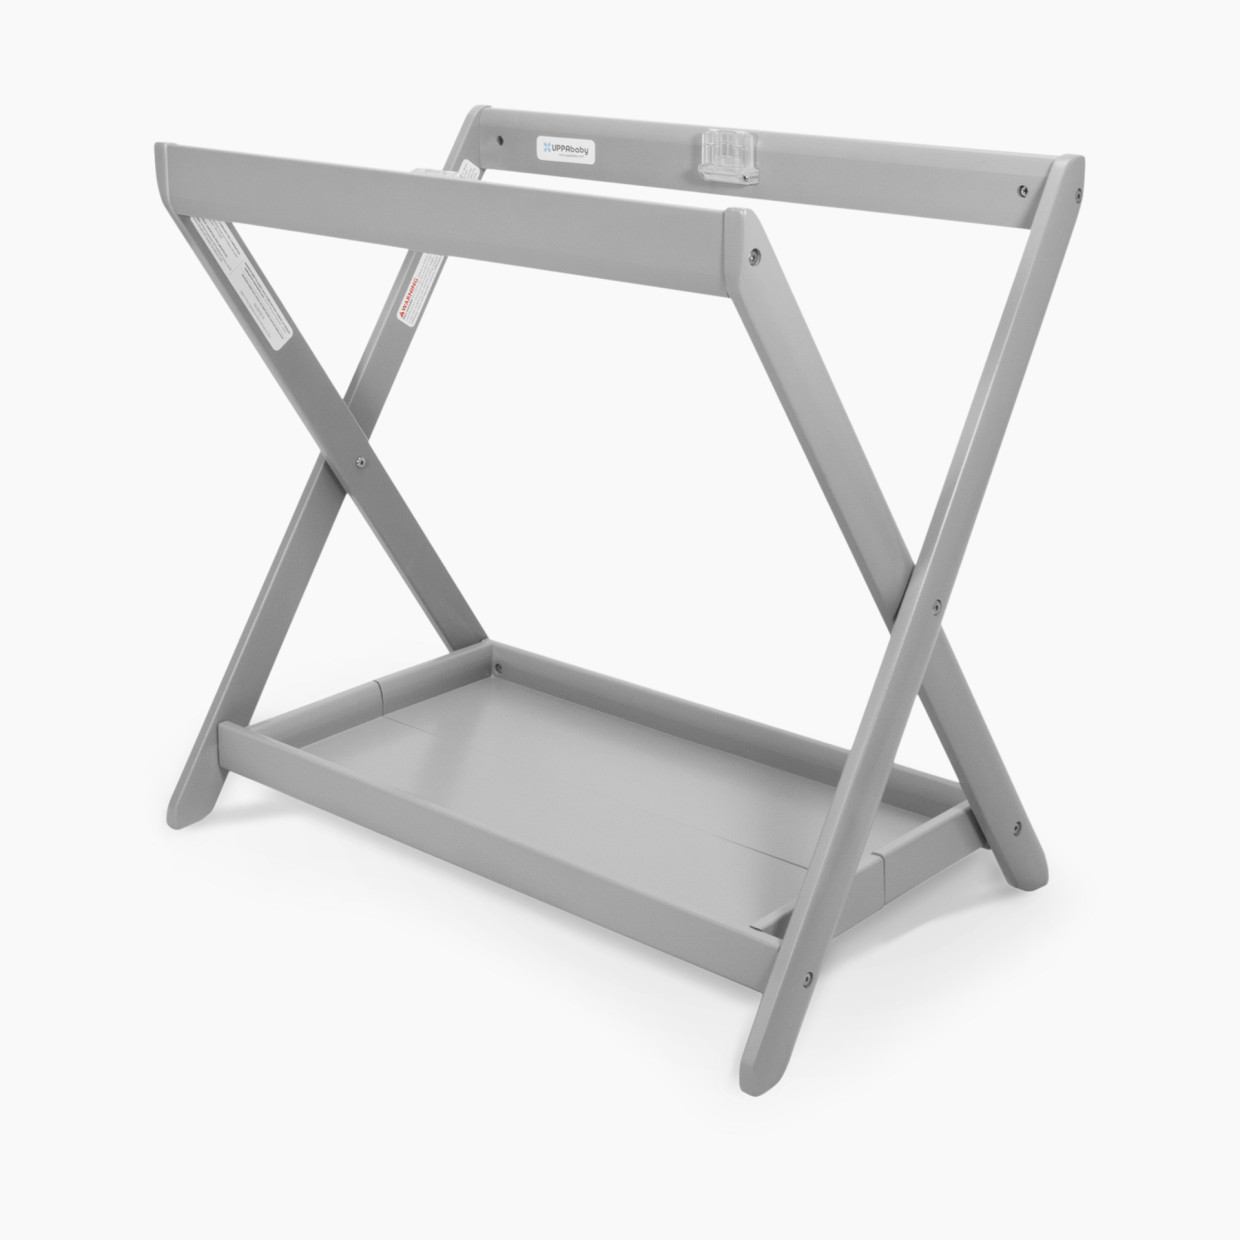 UPPAbaby Bassinet Stand for UPPAbaby Bassinets - Grey.